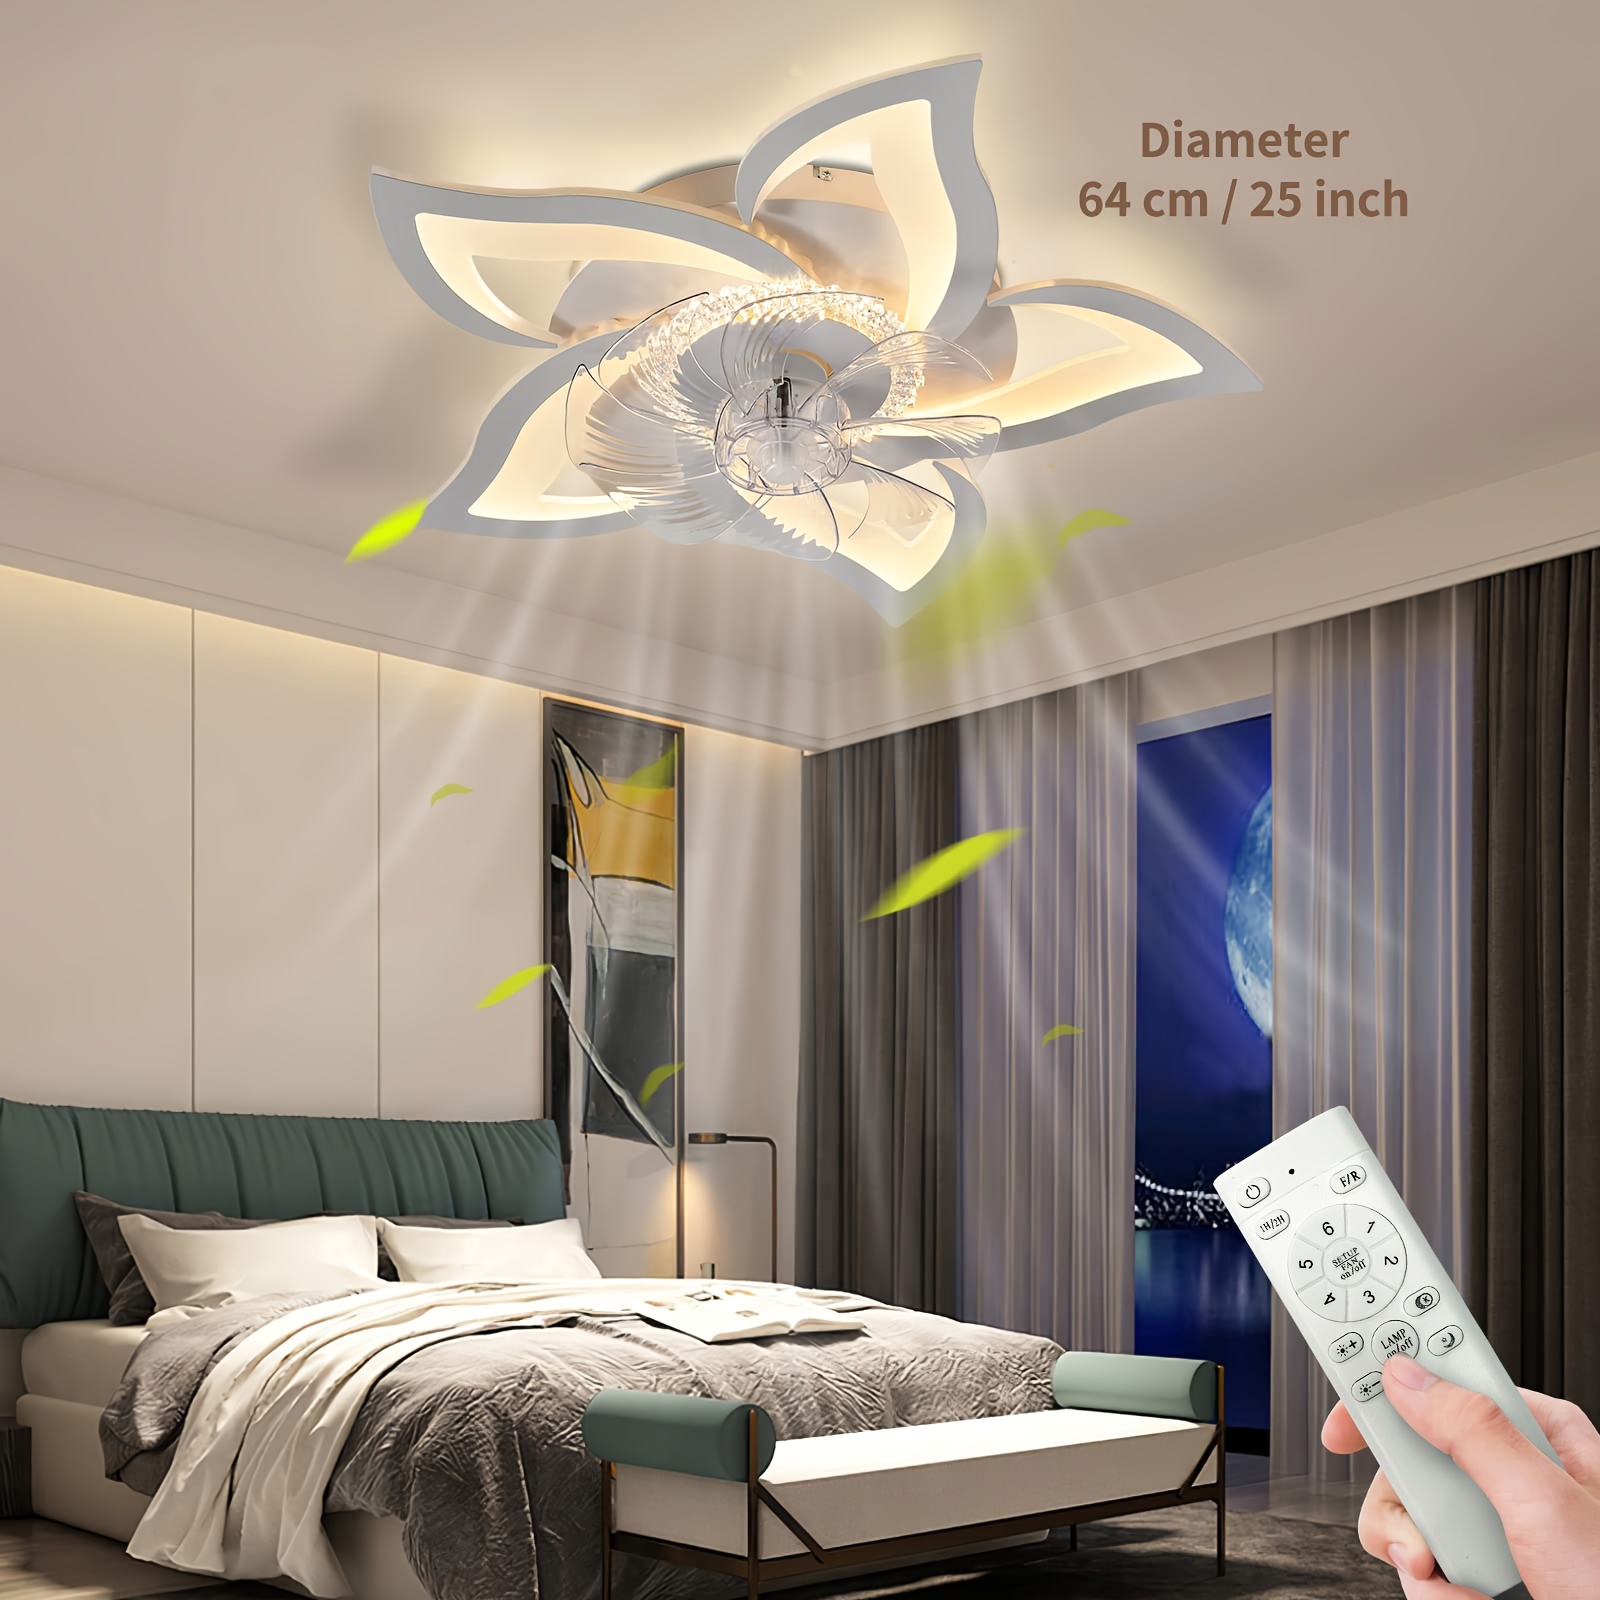 

Ceiling Fan With Light - Modern Ceiling Fan With Smart Led Light And Remote Control, 6 Speeds, 3 Colors, Dimmable For Living Room, Bedroom, And Kitchen, Dh-dx-fan